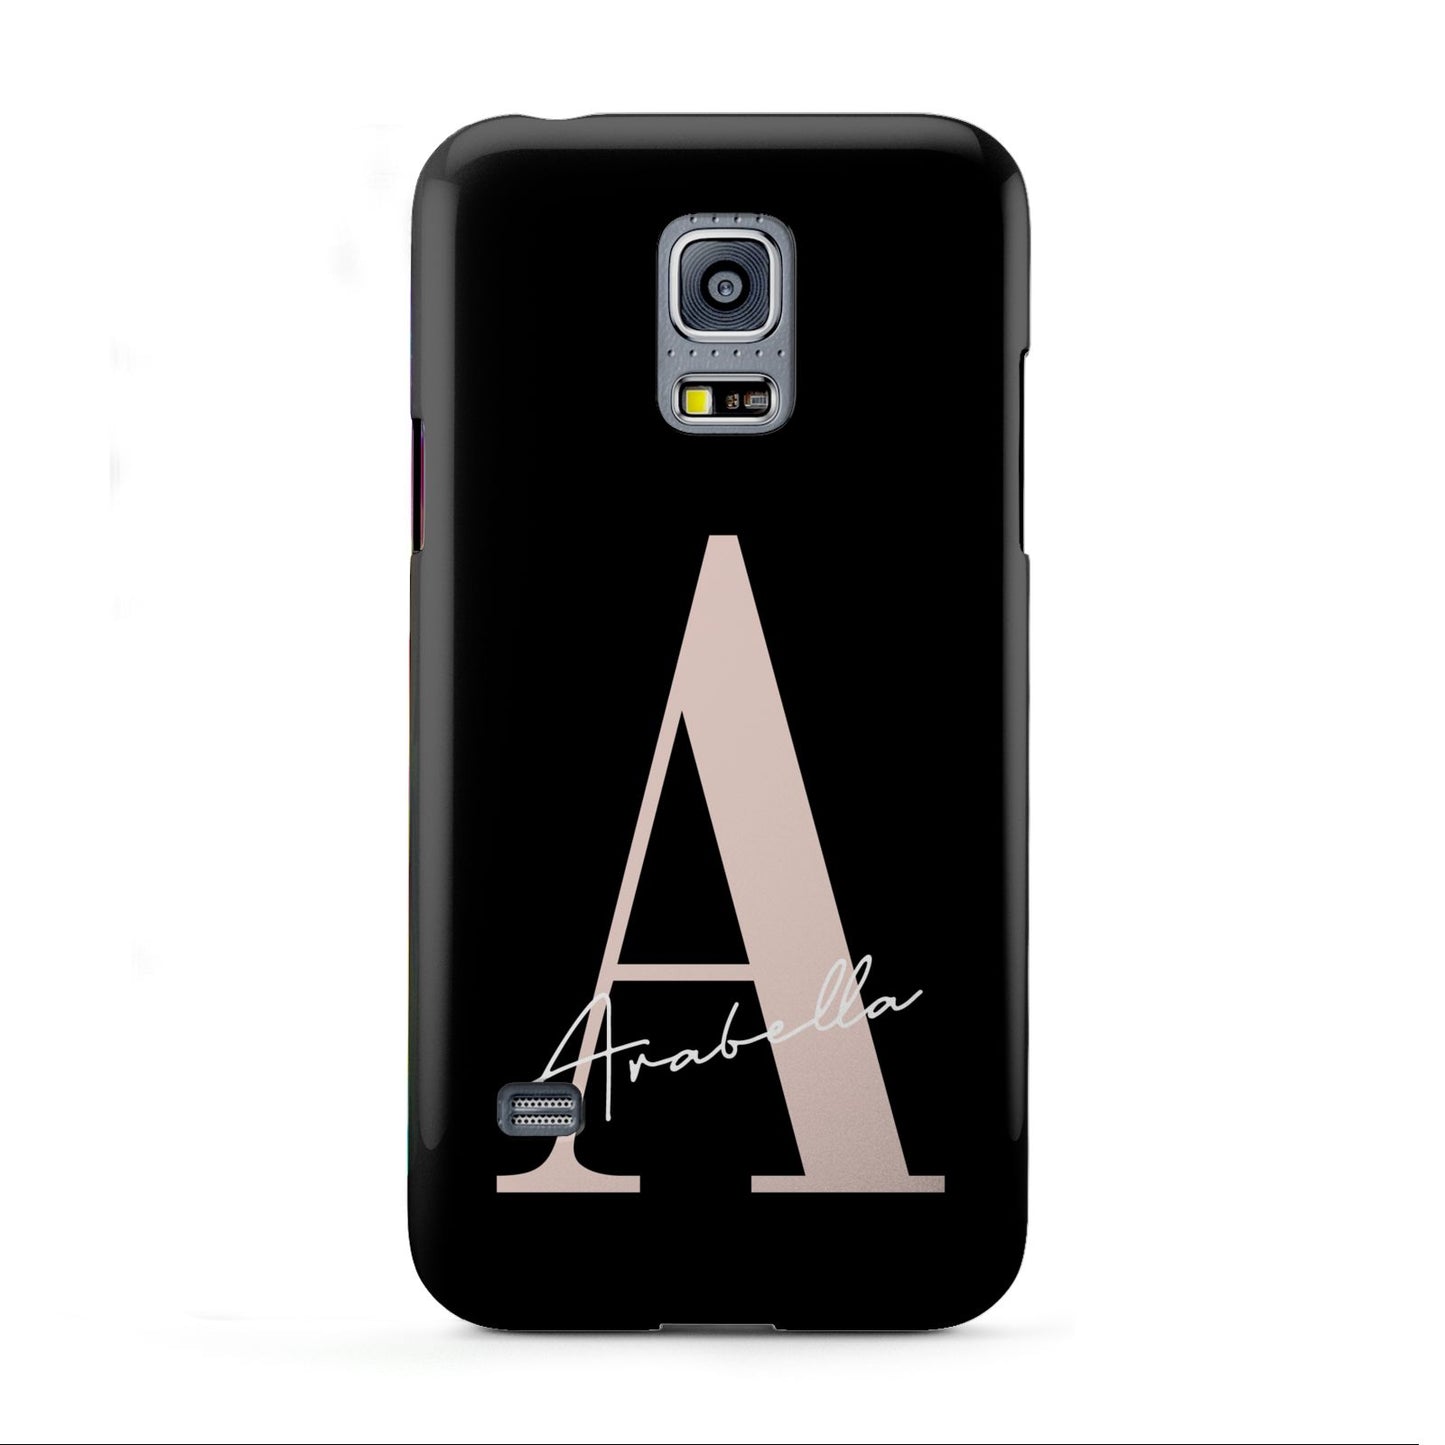 Personalised Black Pink Initial Samsung Galaxy S5 Mini Case